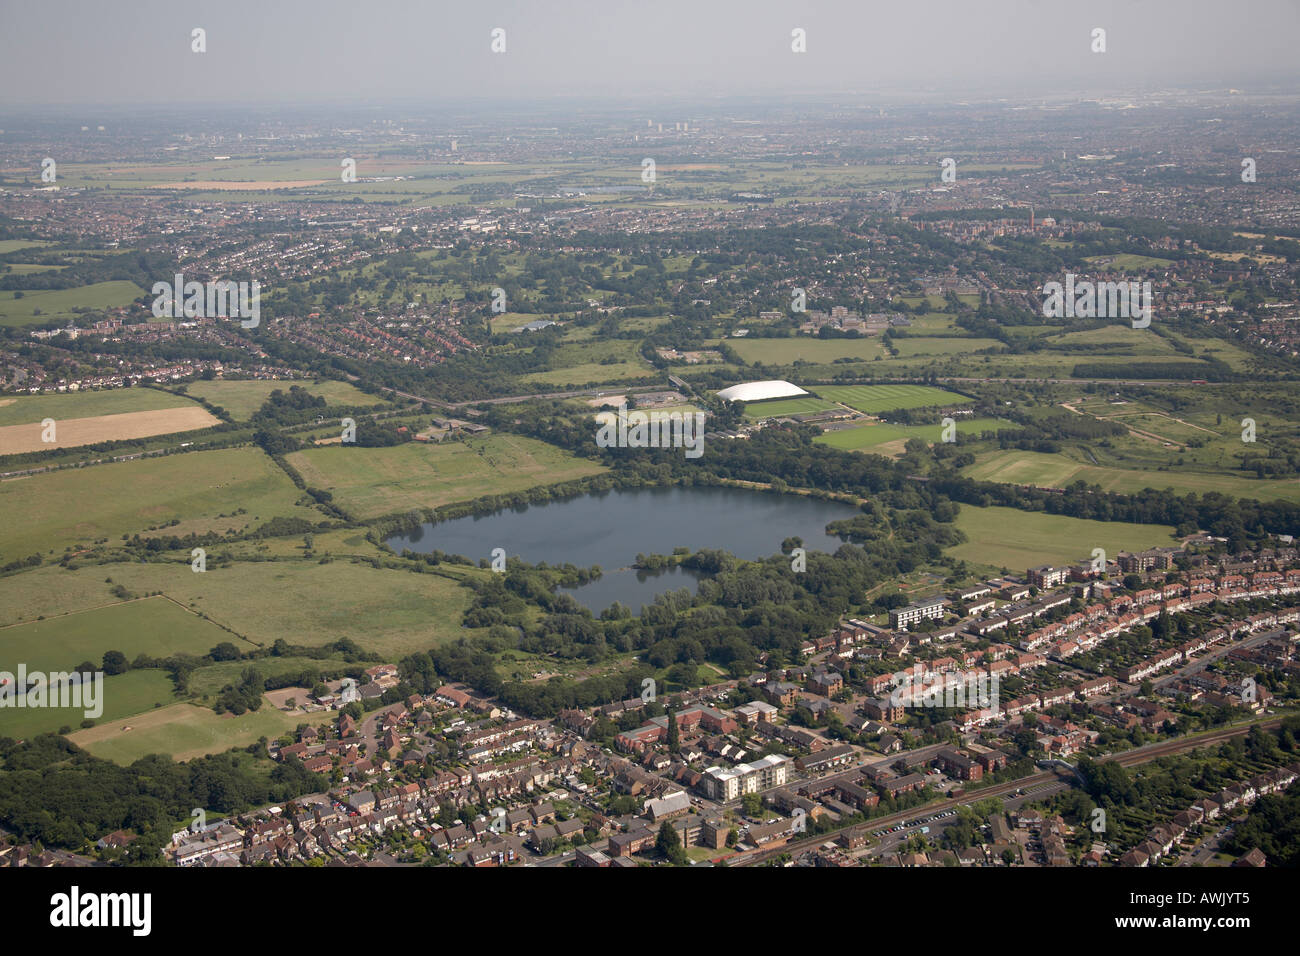 High level oblique aerial view south east of Chigwell New Barns Farm Lake London Guildhall University Sports Ground Playing Fiel Stock Photo